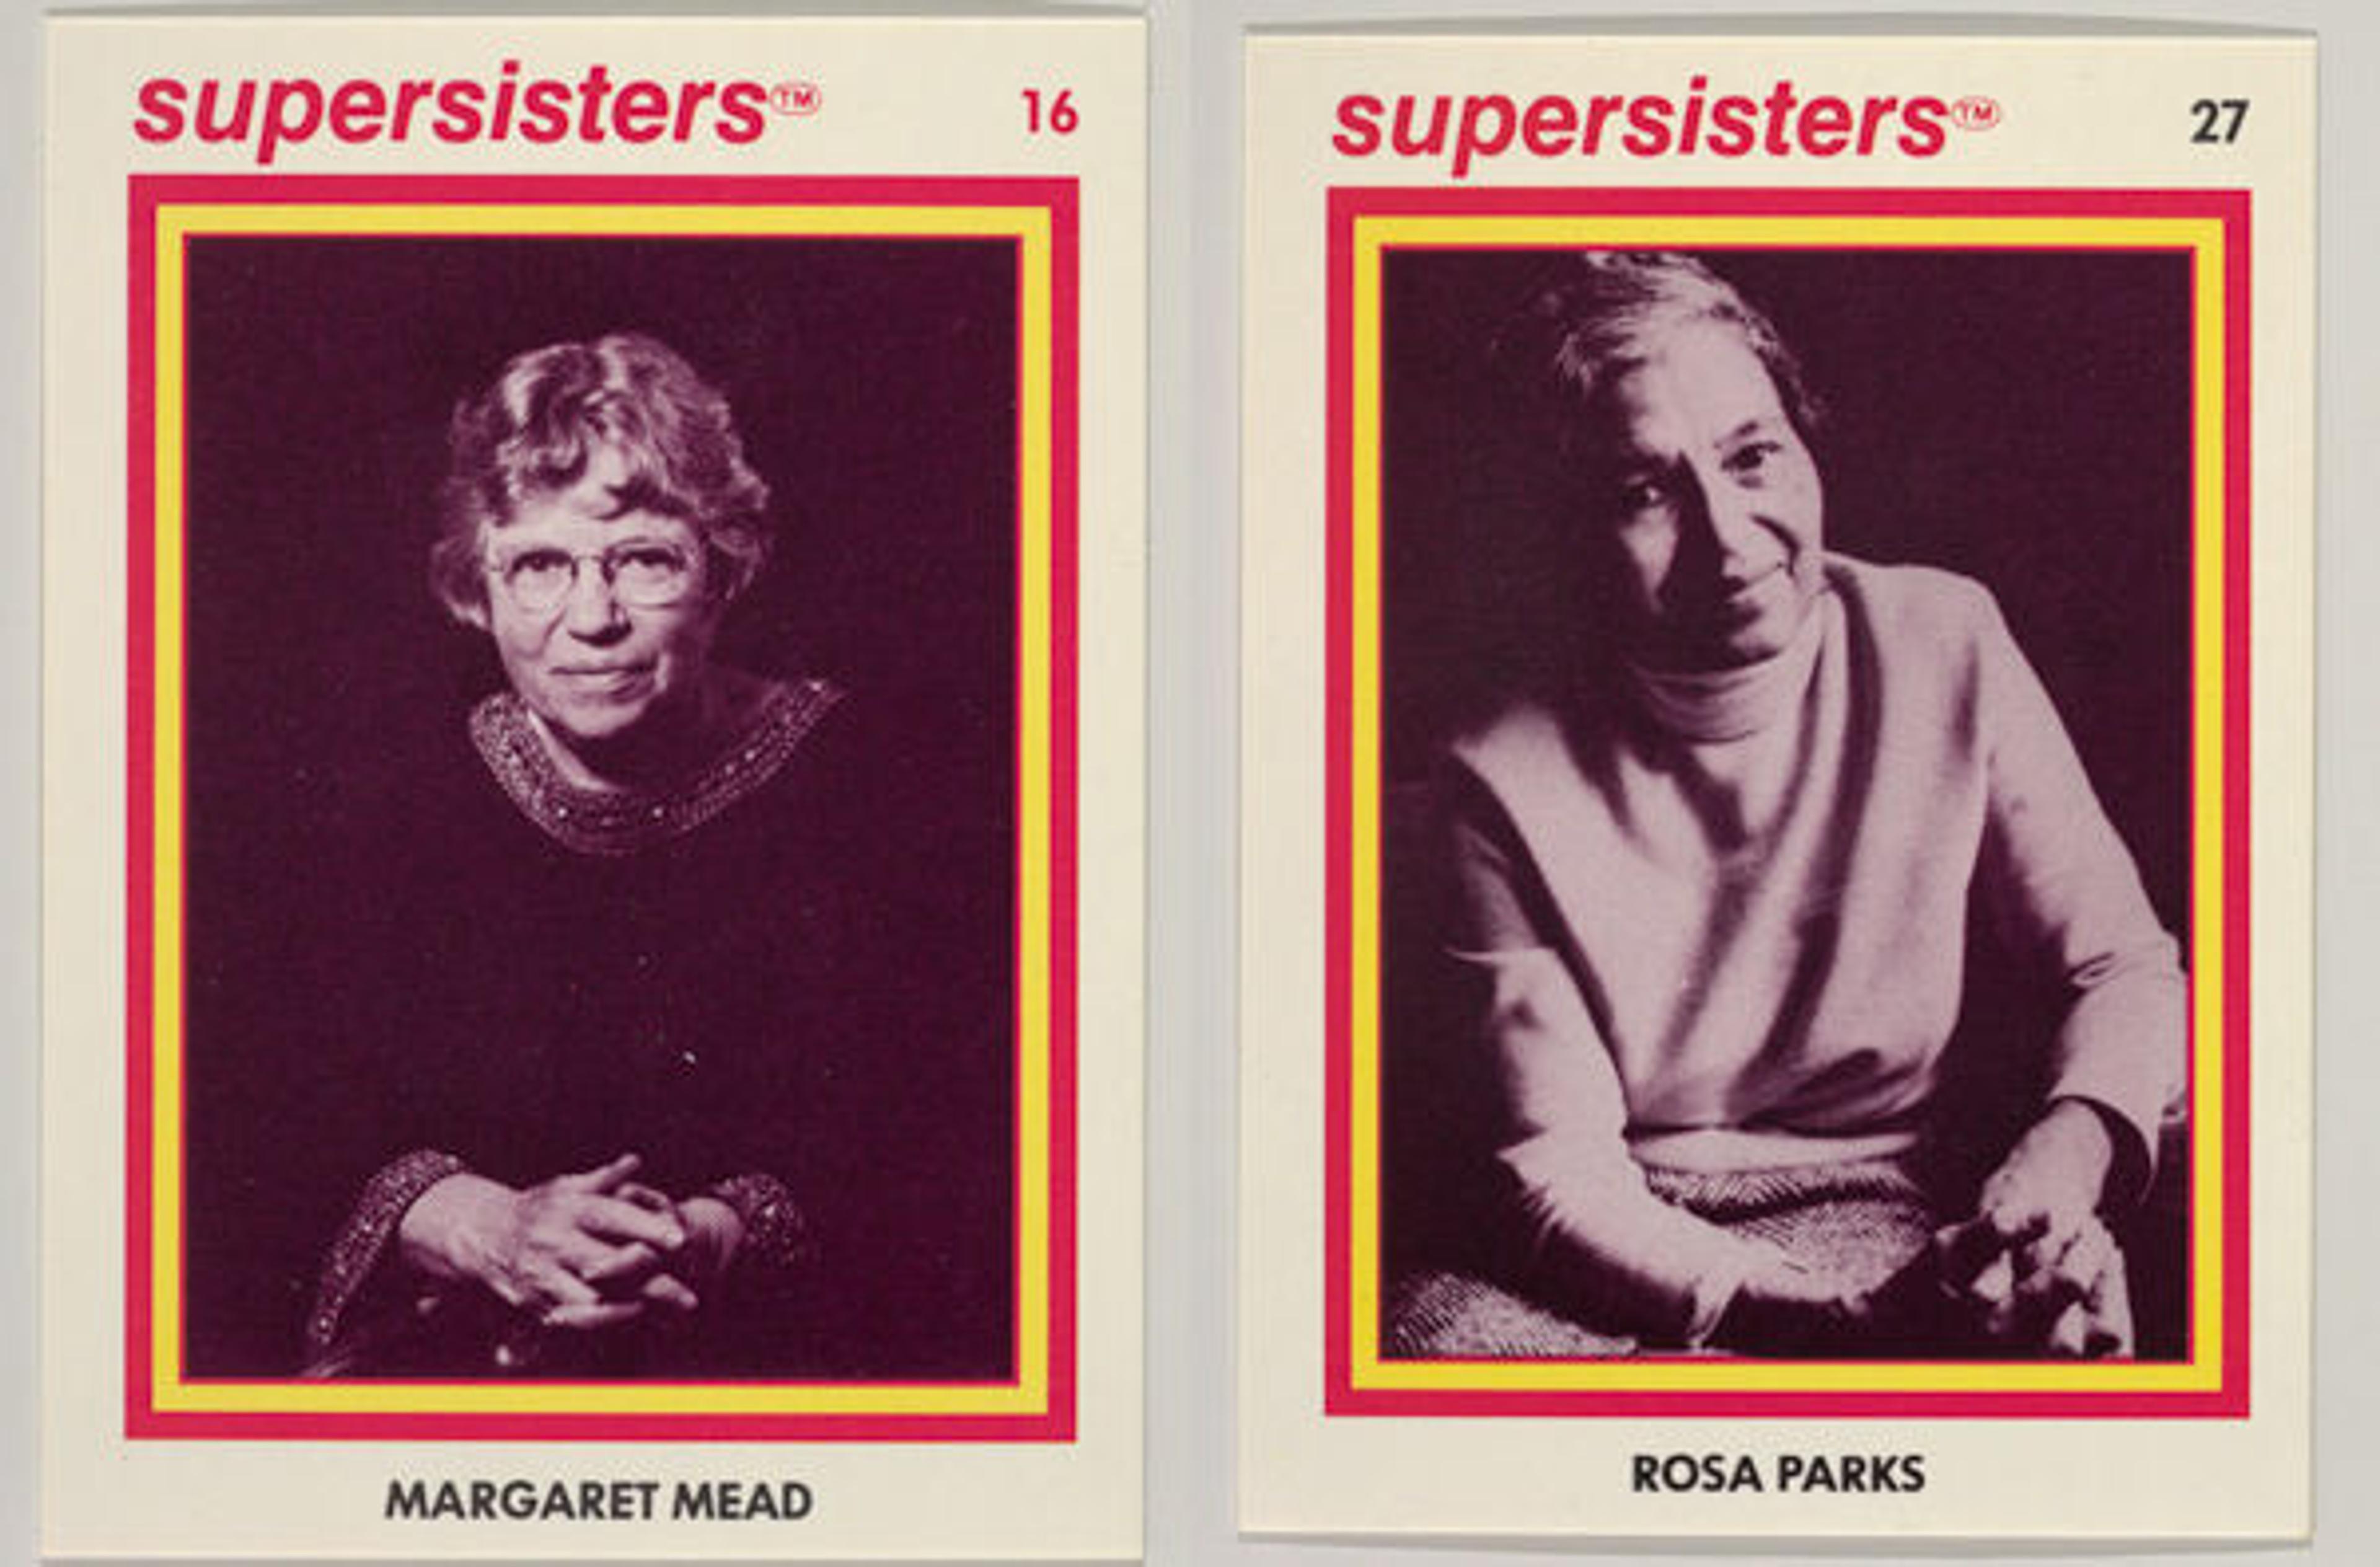 Left: Margaret Mead, Supersisters No. 16; Right: Rosa Parks, Supersisters No. 27